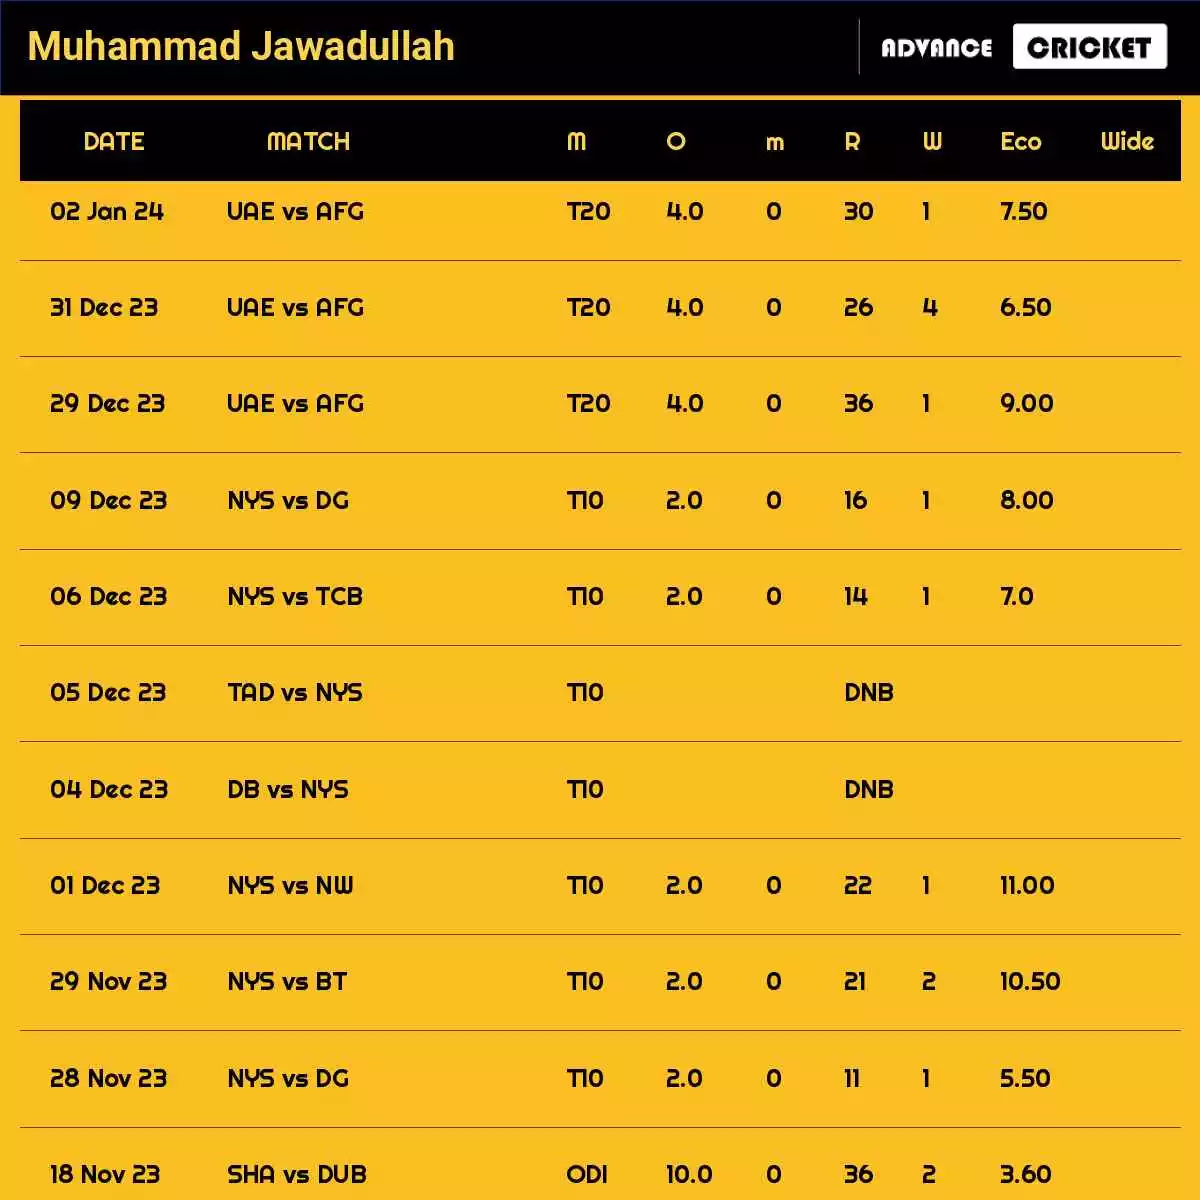 Muhammad Jawadullah Recent Matches Details Date Wise